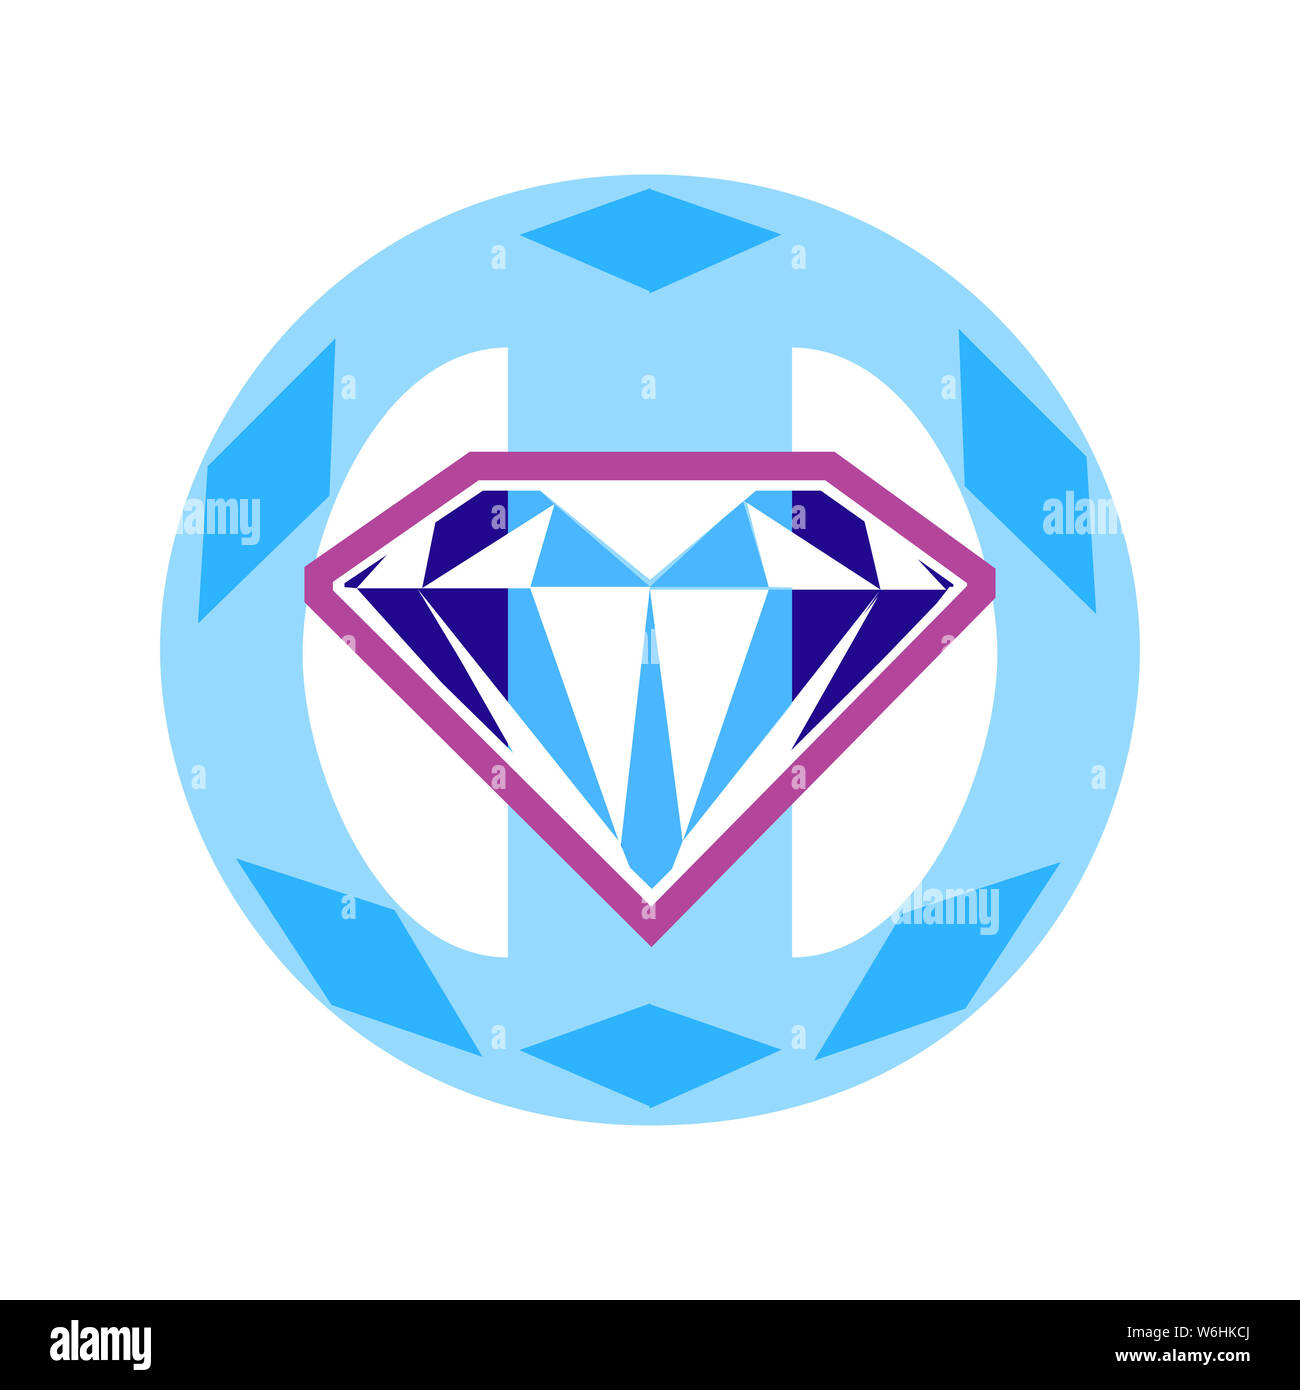 A diamond icon in front of a soccer ball shape with a circle of basic diamond shapes. Stock Photo